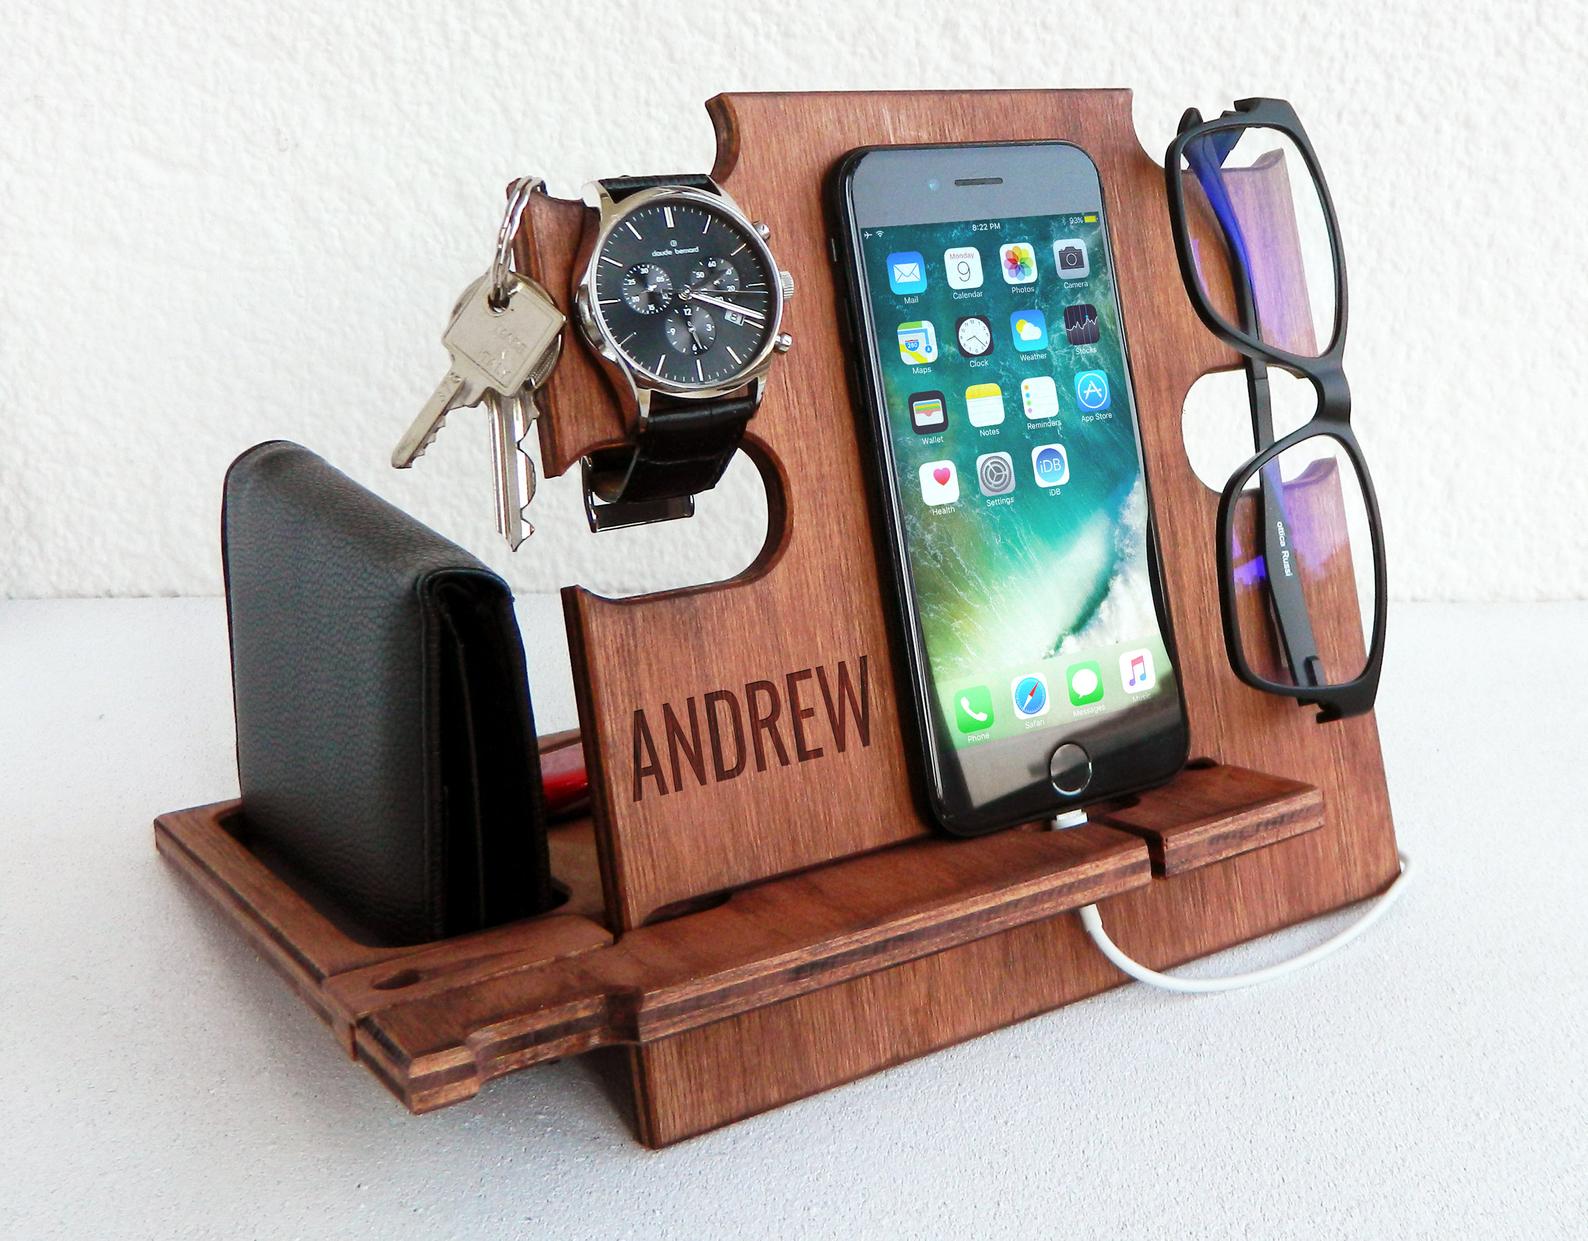 Wallet, keys, phone and glasses on personalised docking station